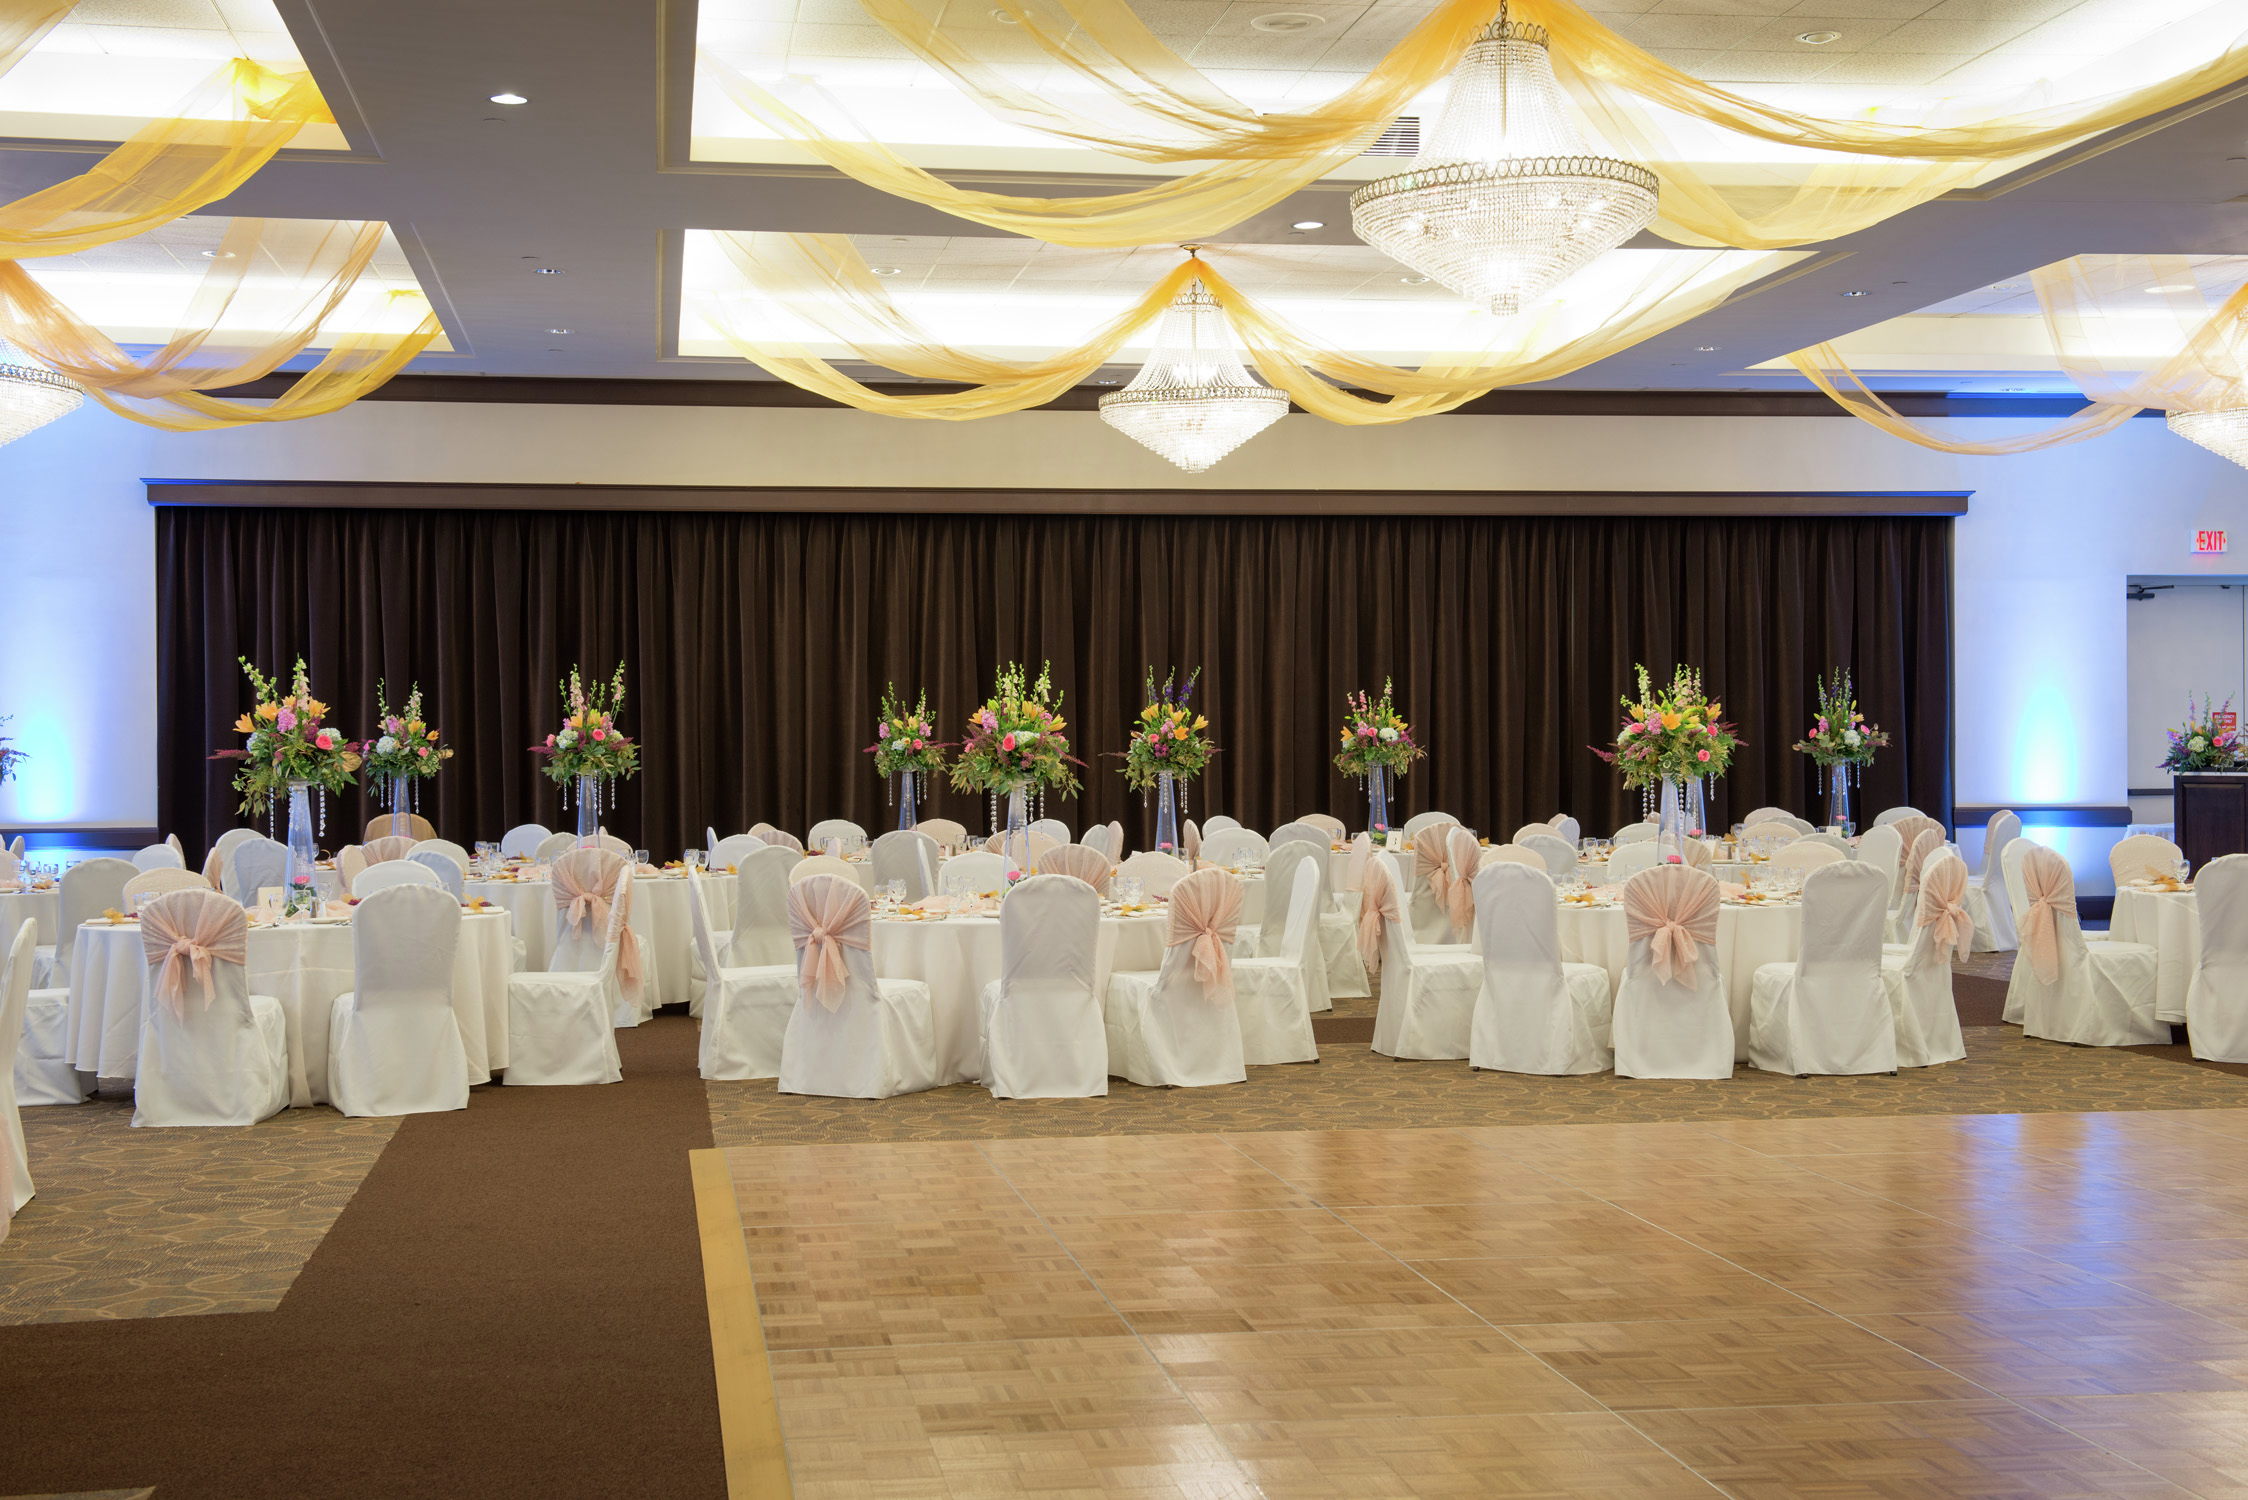 Ballroom With White Chairs, Flowers, and White Linens on Banquet Tables by Stage and Dance Floor